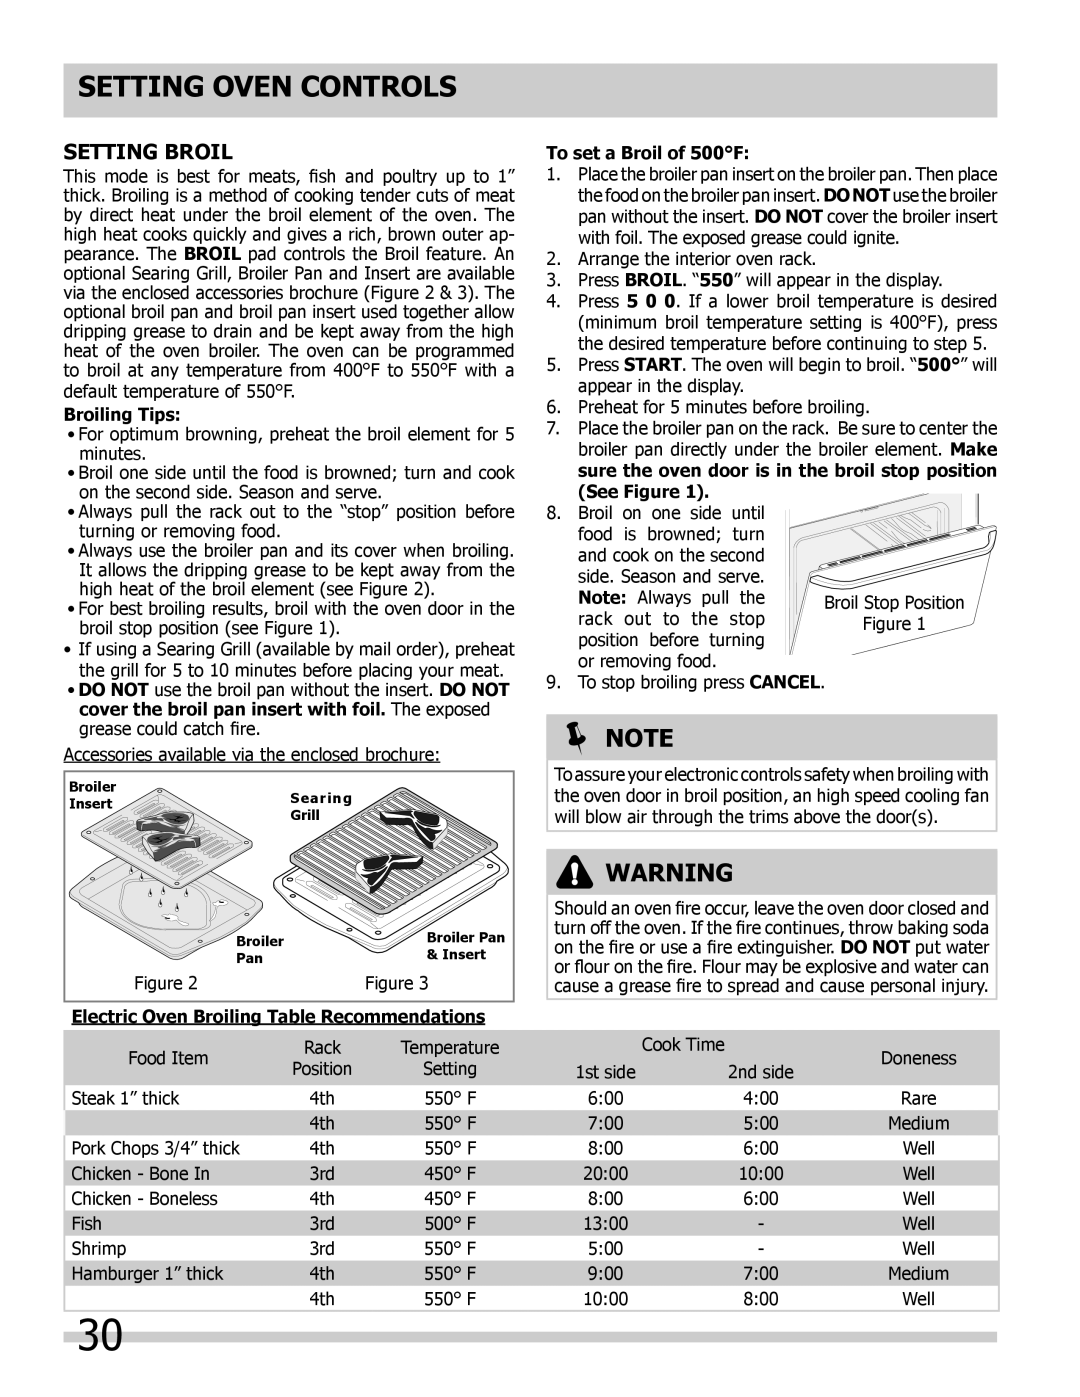 Frigidaire 318205804 Setting Broil, Broiling Tips, Electric Oven Broiling Table Recommendations, To set a Broil of 500F 